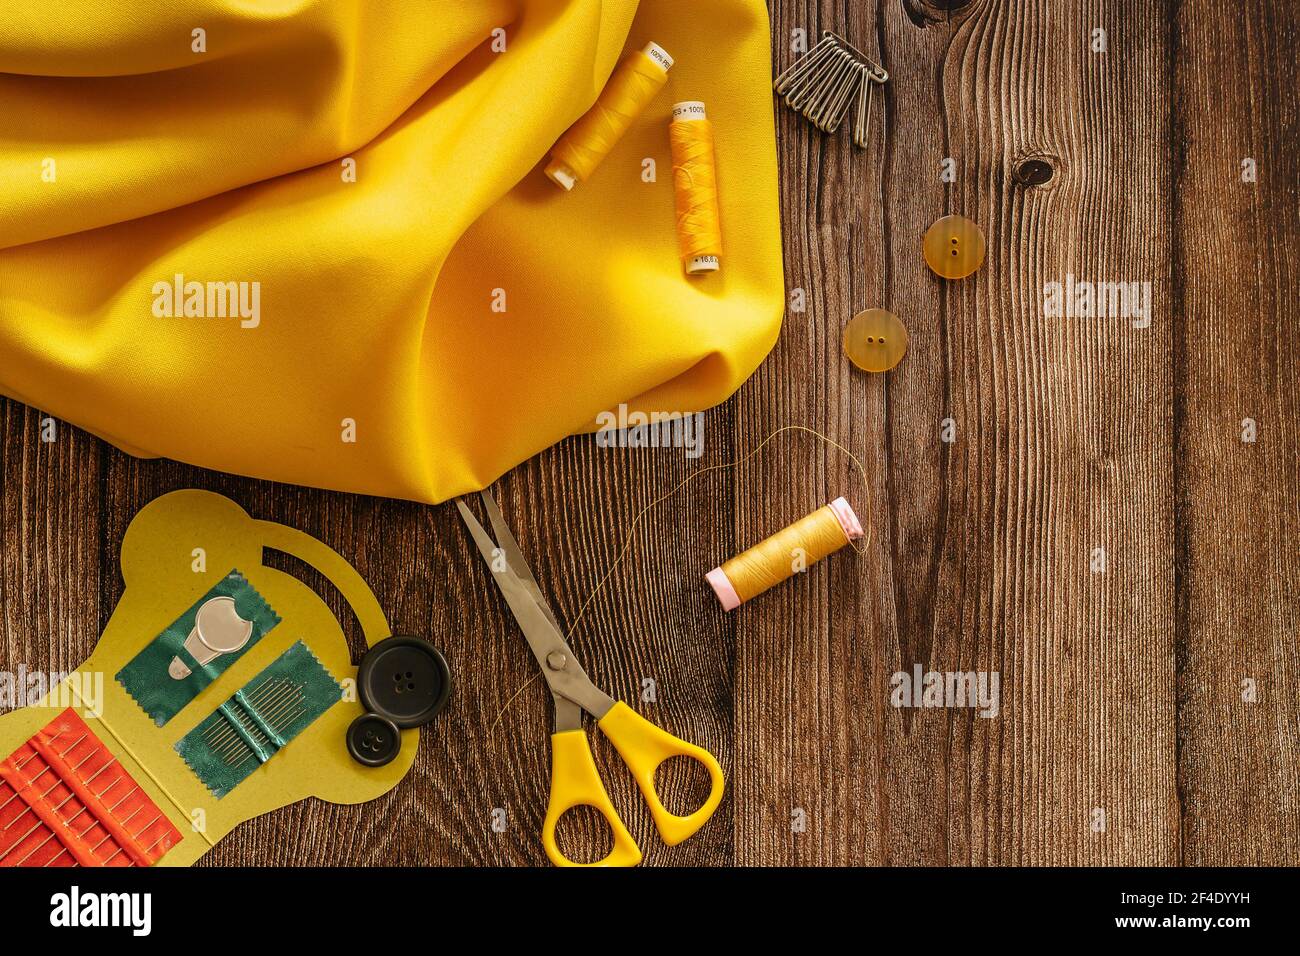 Sewing accessories and yellow fabric on wooden table. Sewing threads, needles, pins, buttons and scissors. Top view, flat lay concept. Accessories Stock Photo